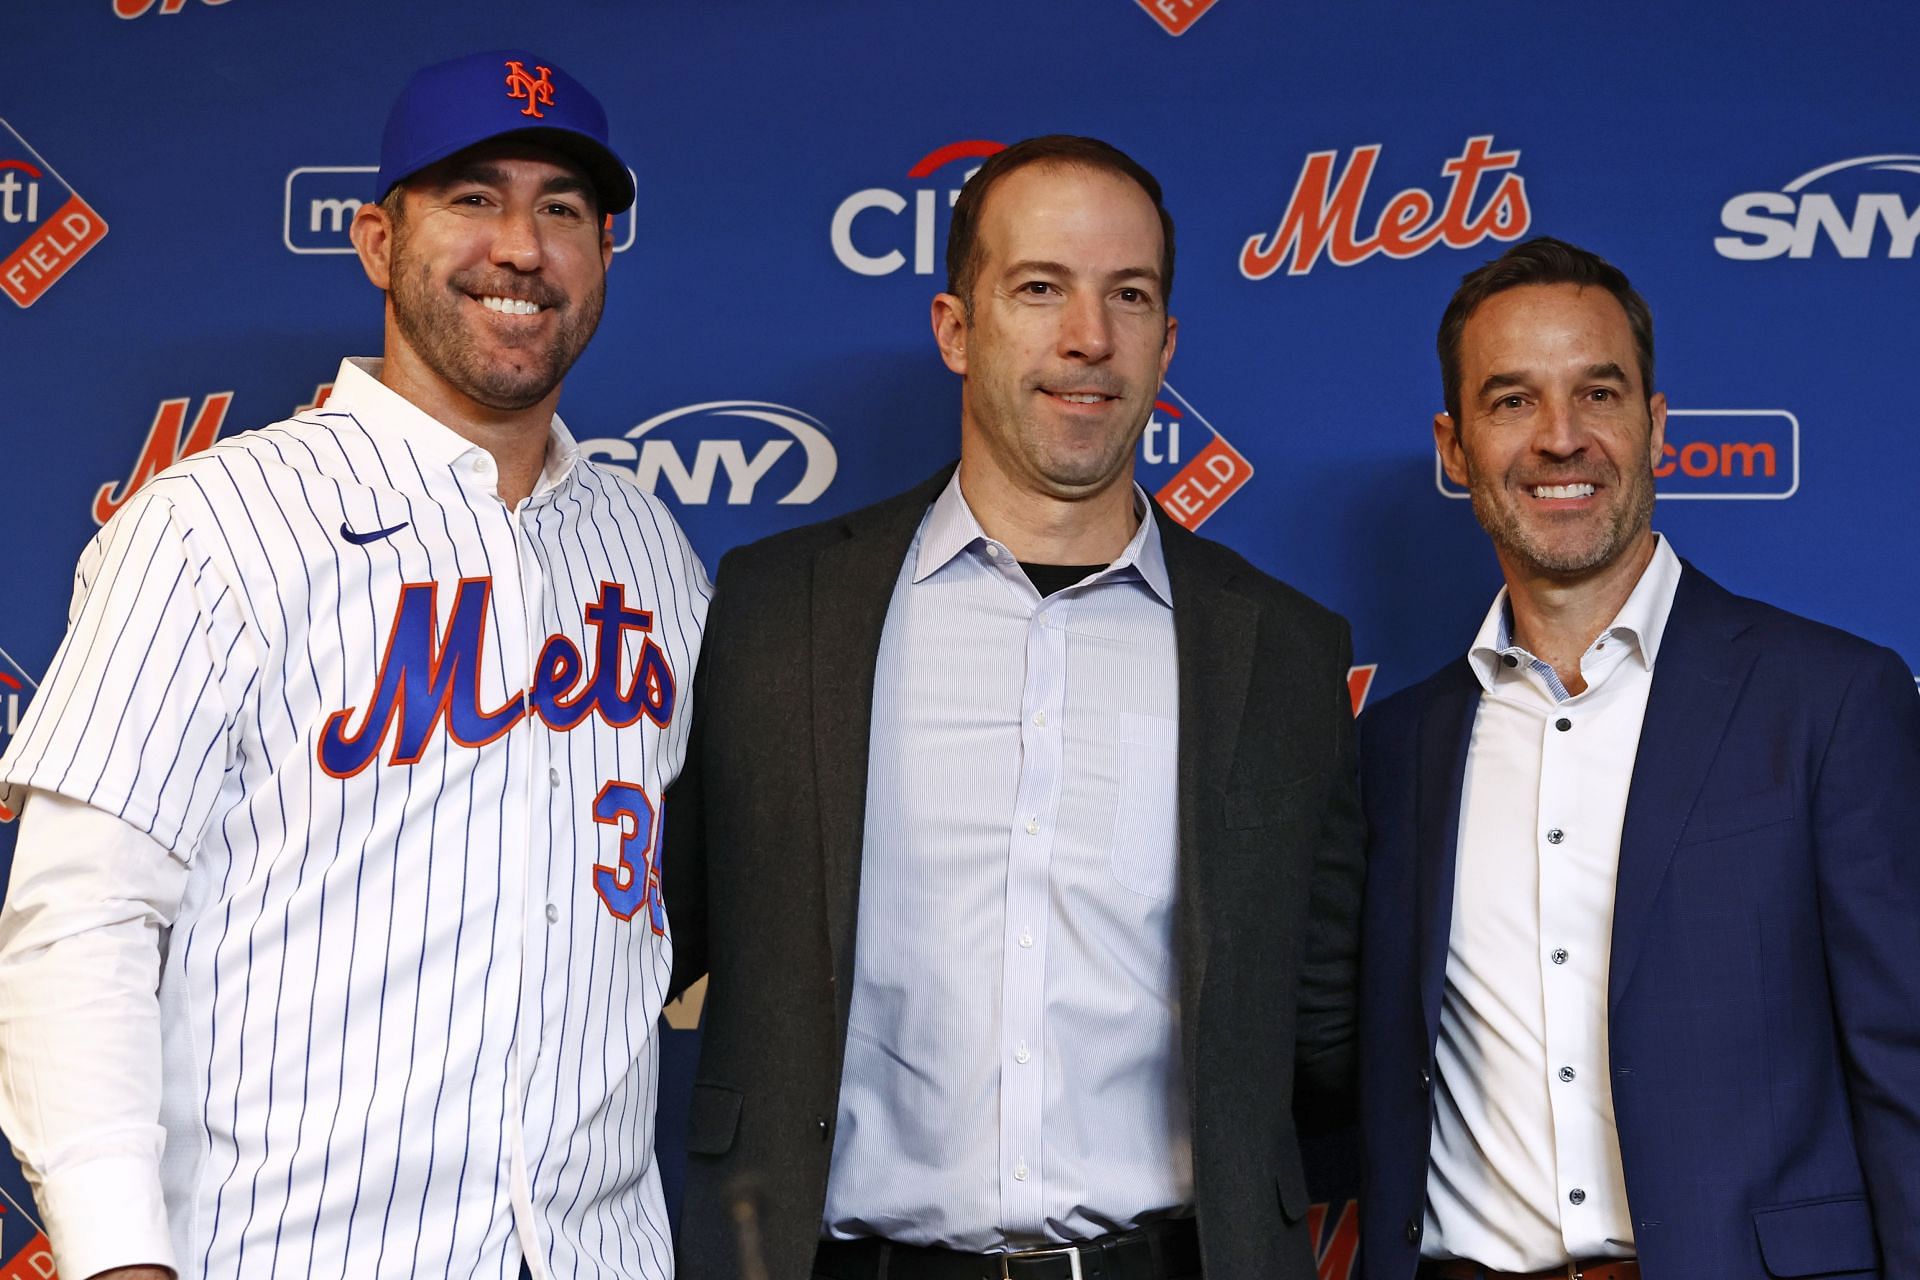 Pitcher Justin Verlander of the New York Mets general manager Billy Eppler and his agent Mark Pieper during his introductory press conference at Citi Field